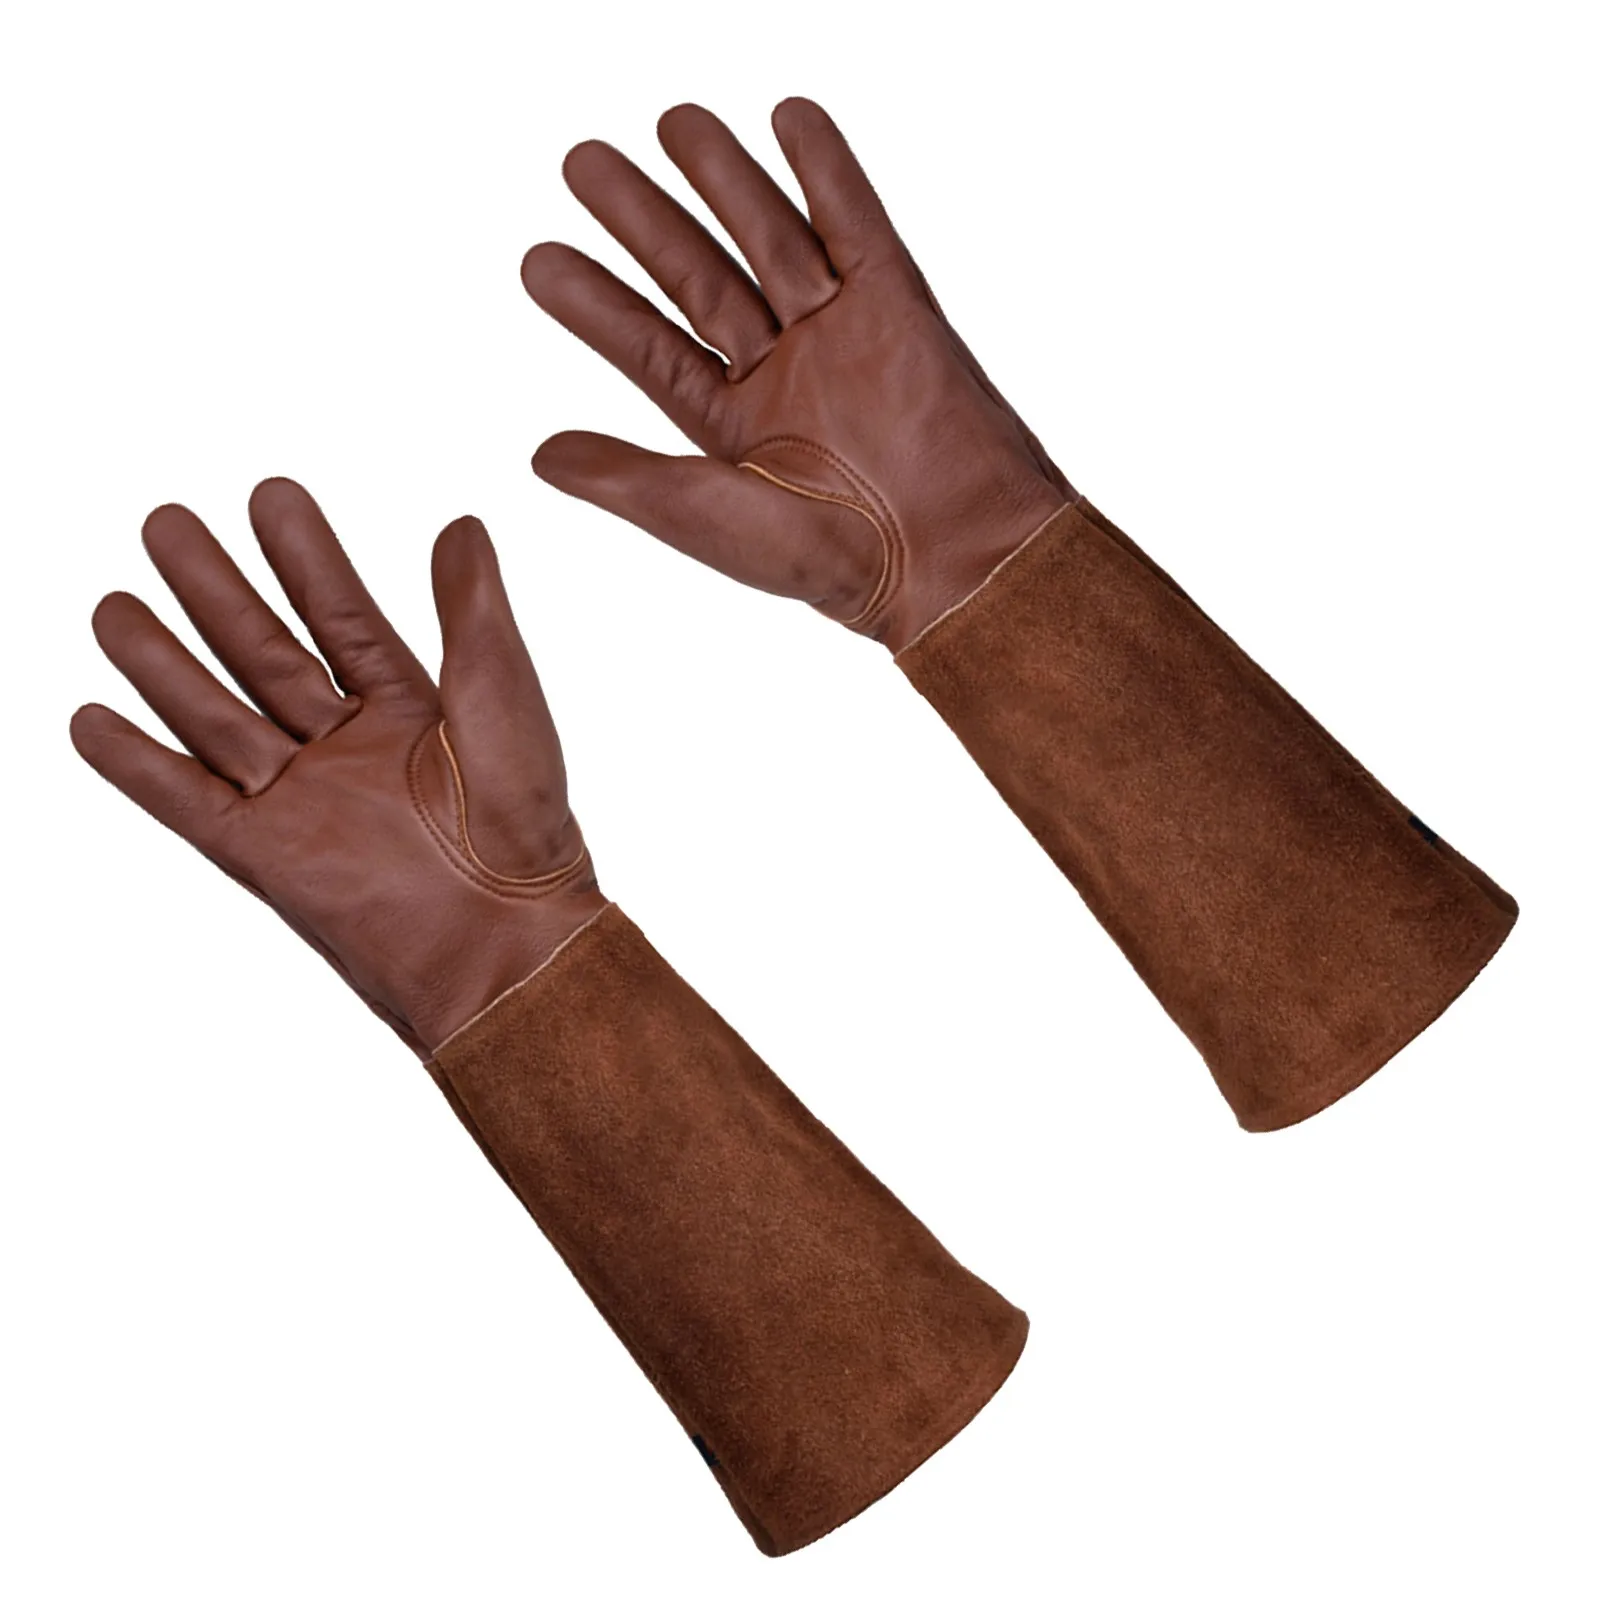 Goatskin Leather Gardening M Rose Pruning Thorn Proof Gloves For Men and Women 